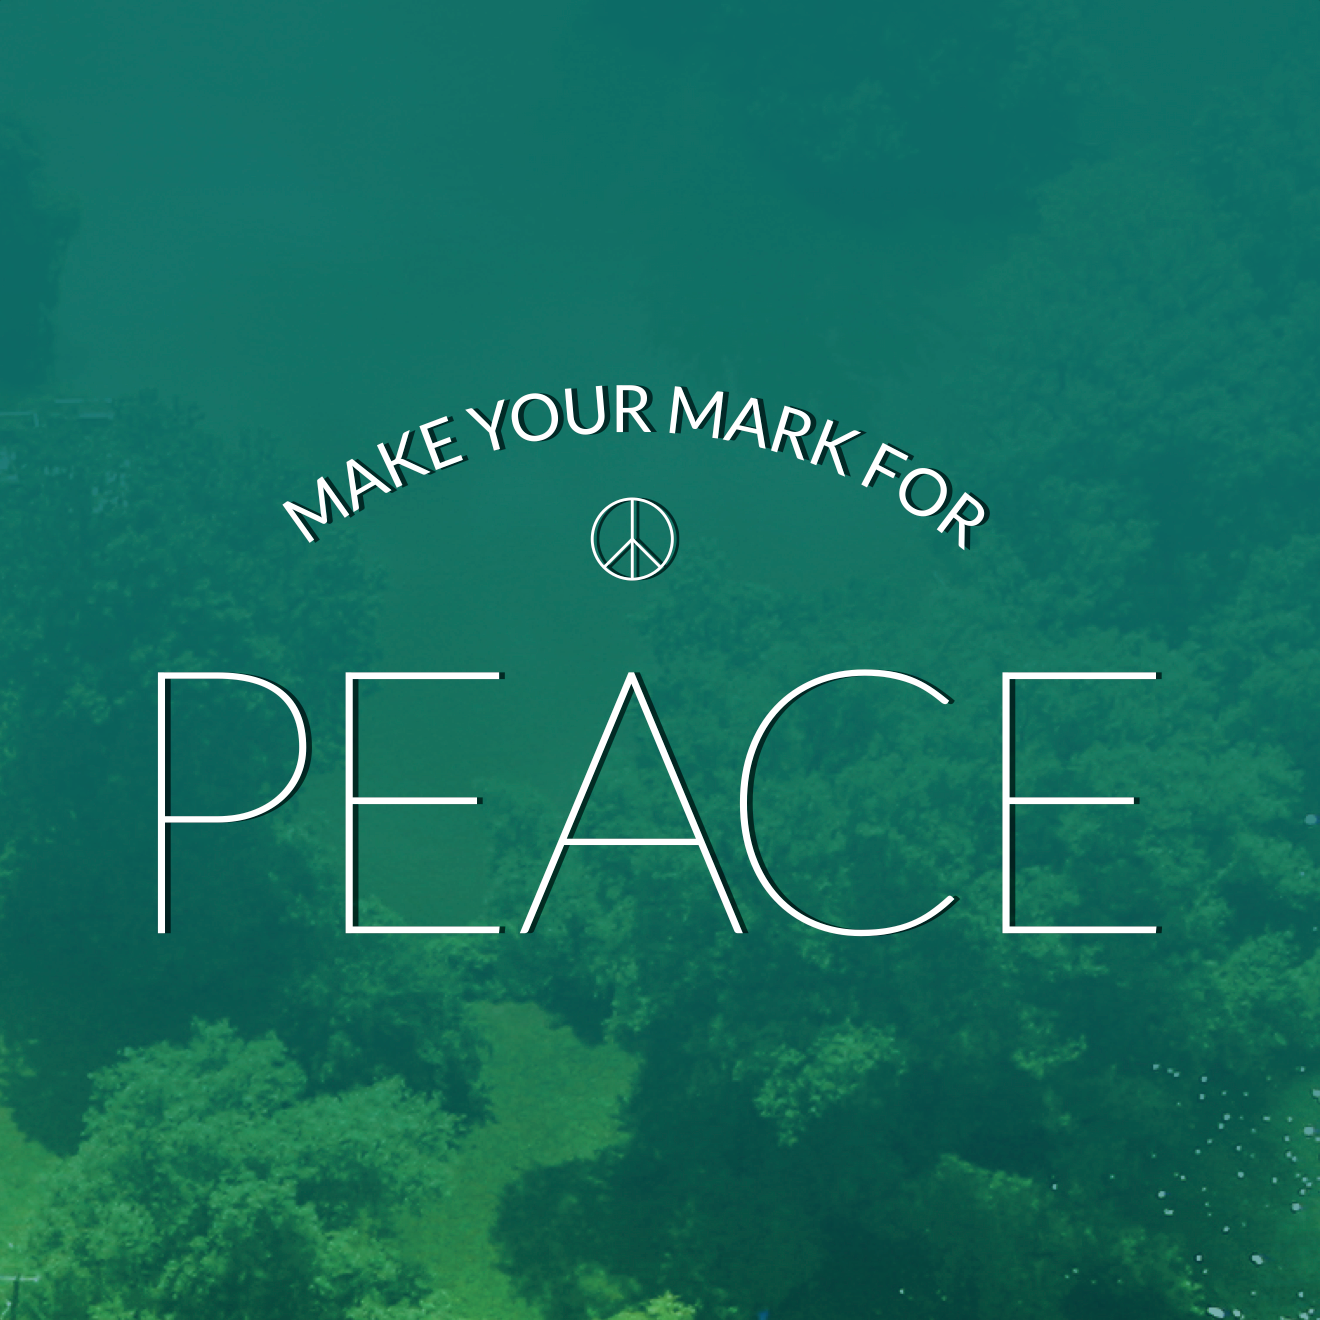 Project “Mark for peace”